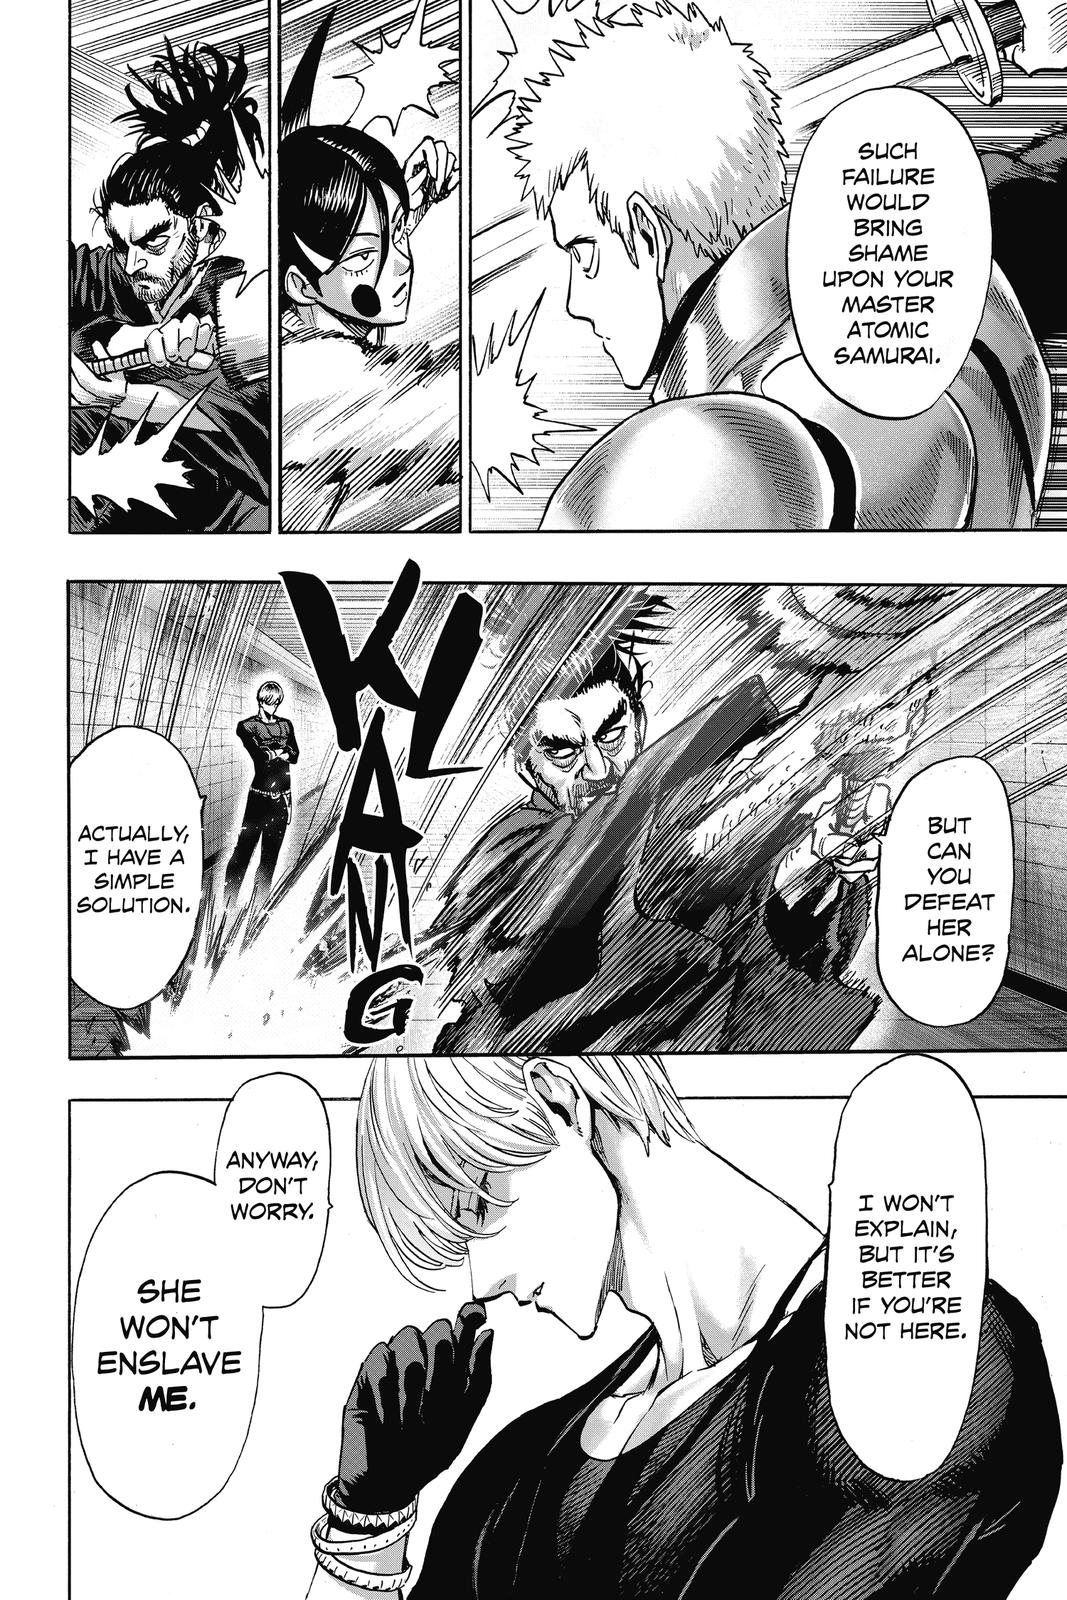 One-Punch Man, Punch 105 image 22